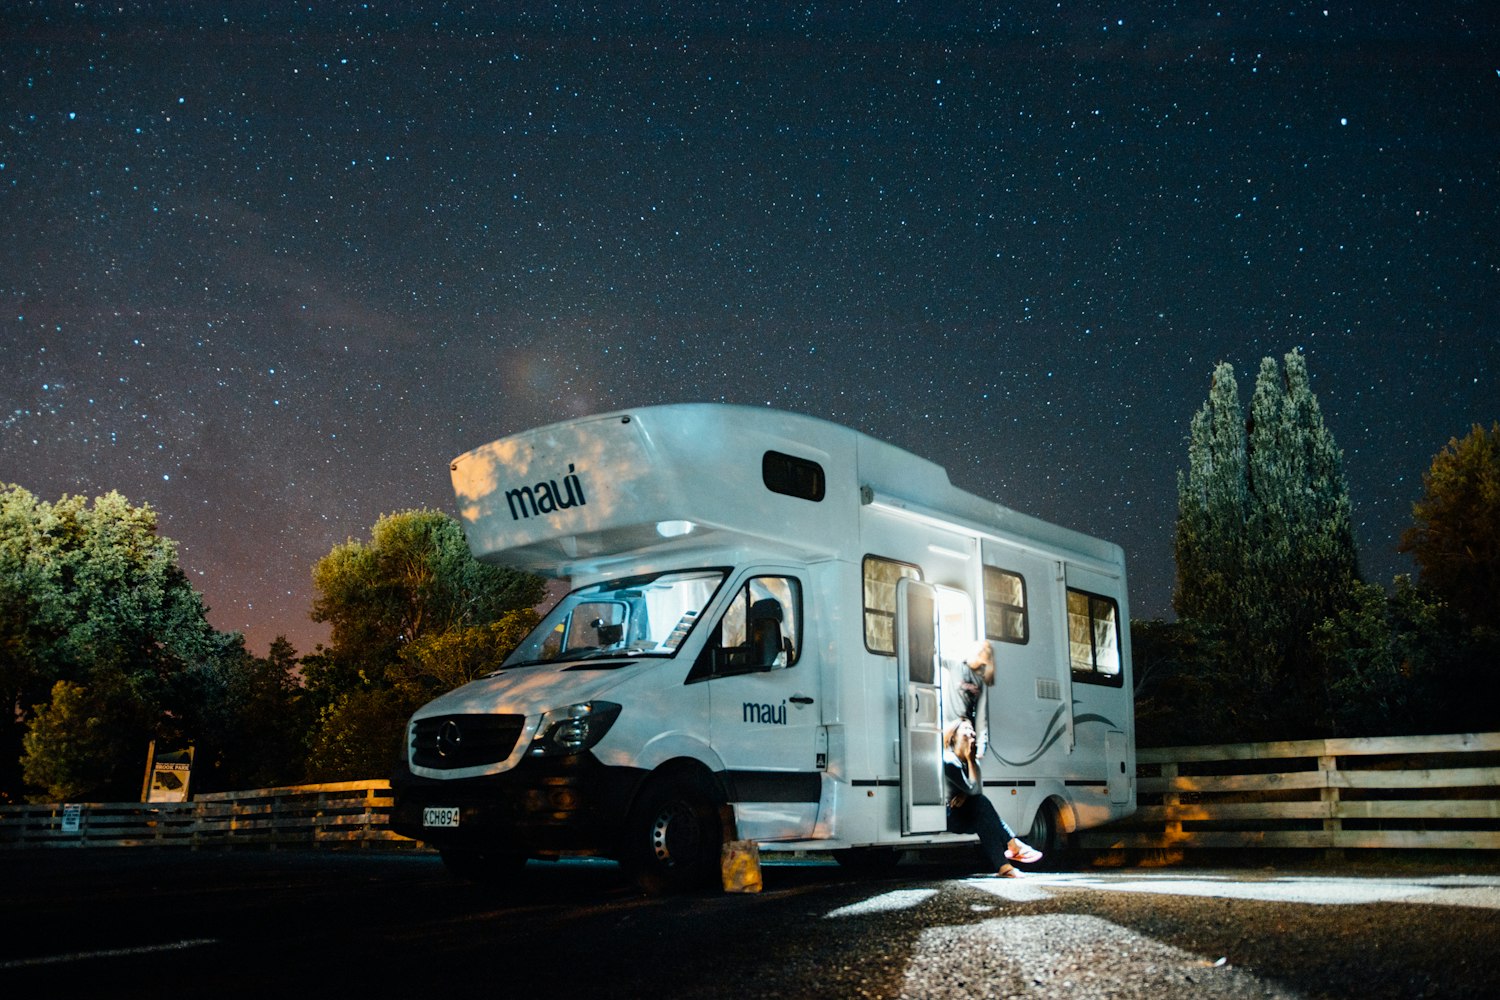 RV is lighted using the Solar power in the middle of the night